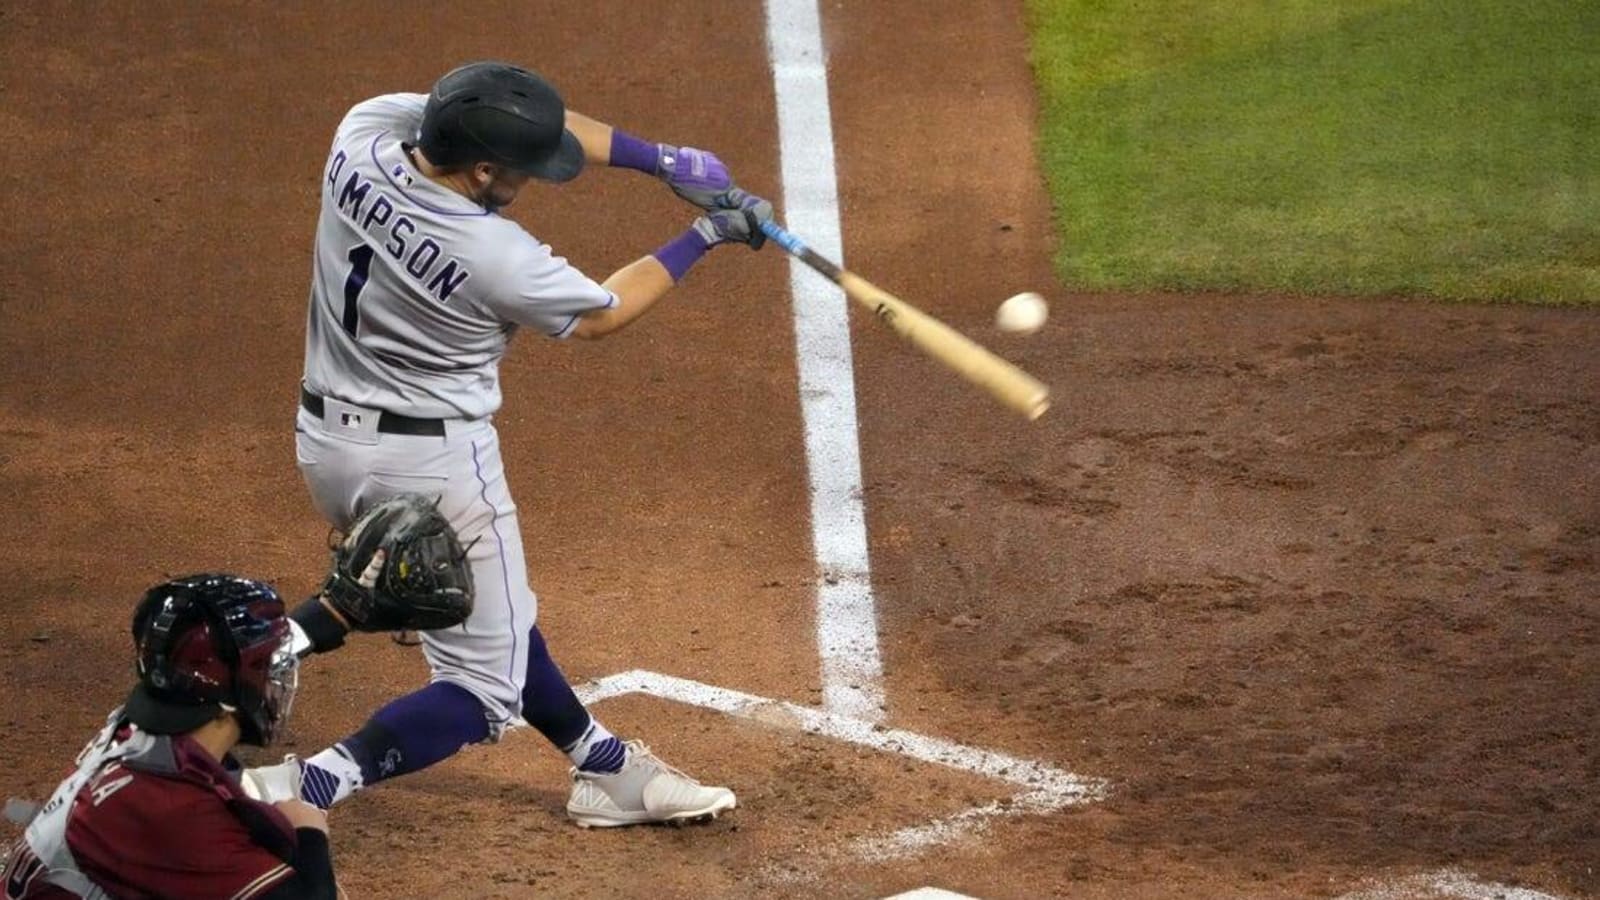 Rockies capitalize on error, forge comeback win over D-backs